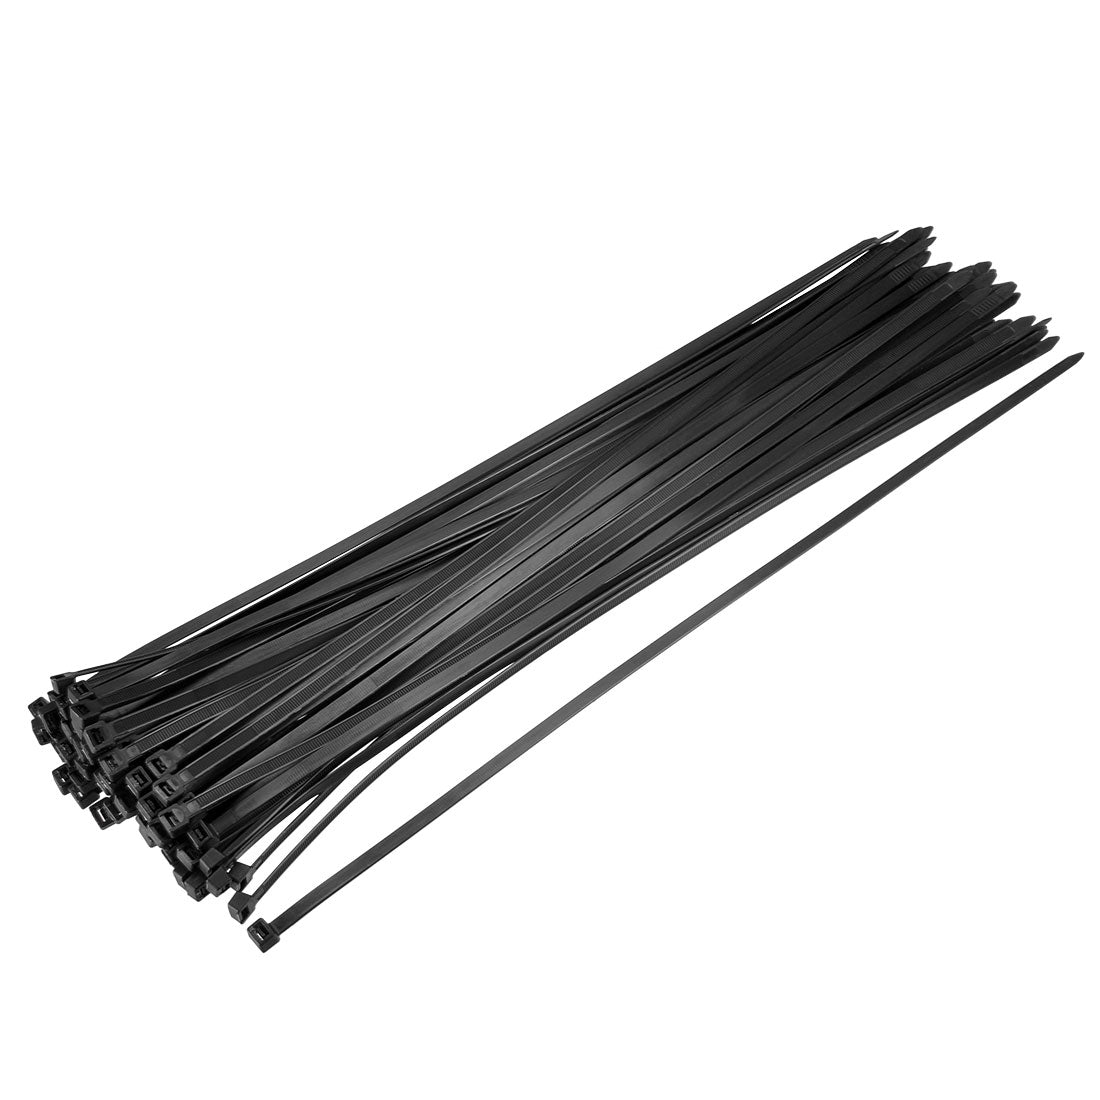 uxcell Uxcell Cable Zip Ties 250mmx3.3mm Self-Locking Nylon Tie Wraps Black 60pcs